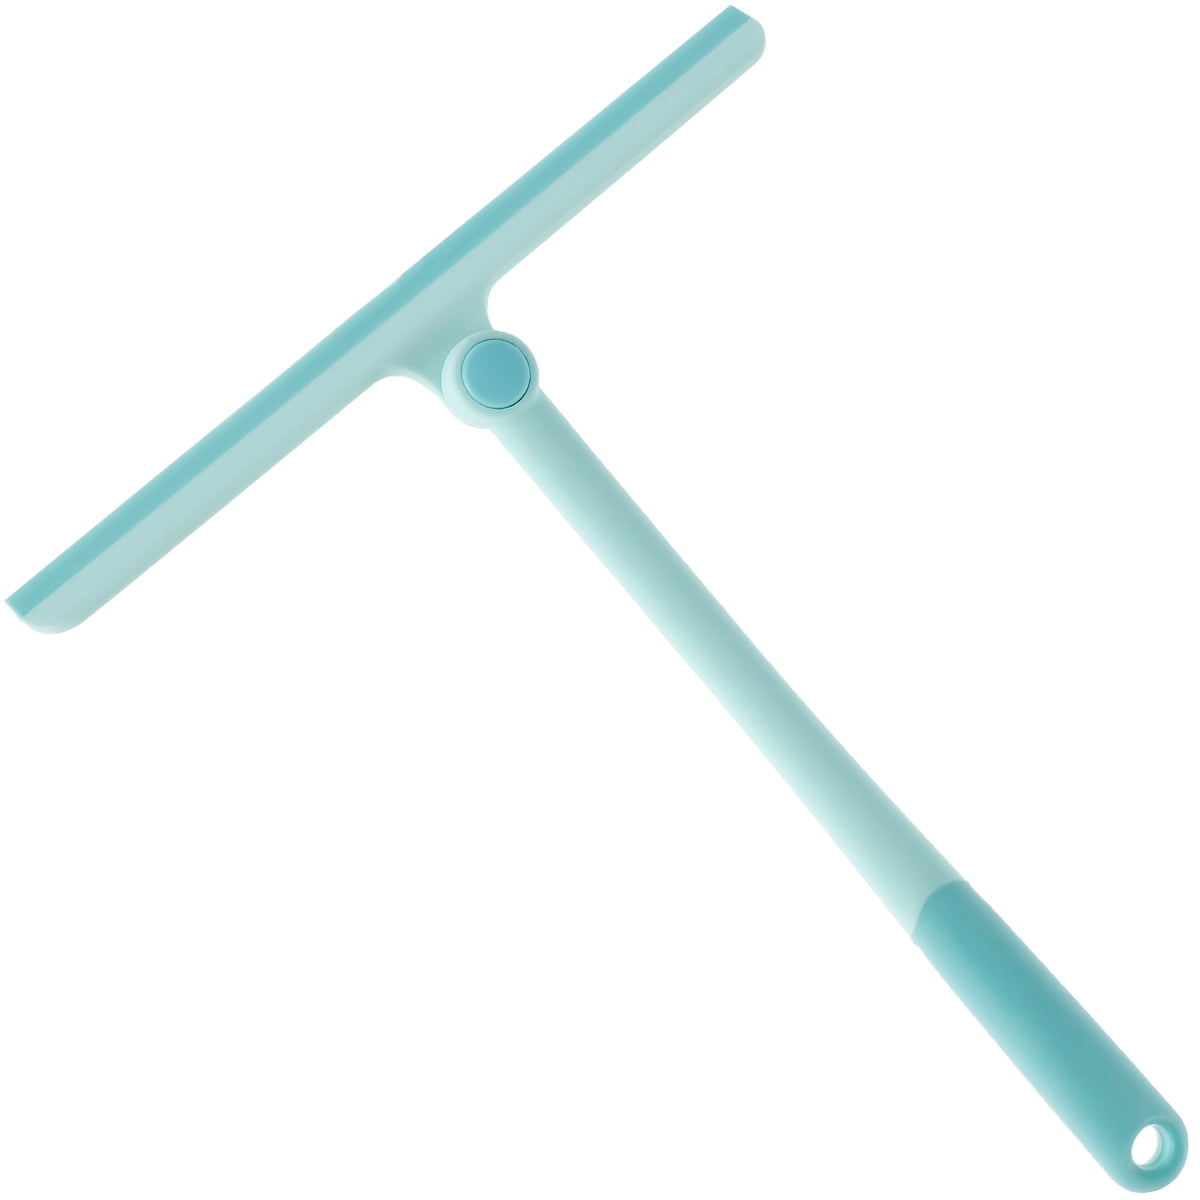 10 inch 24cm Window Cleaning Squeegee  Washer Windscreen  Was £6.99 